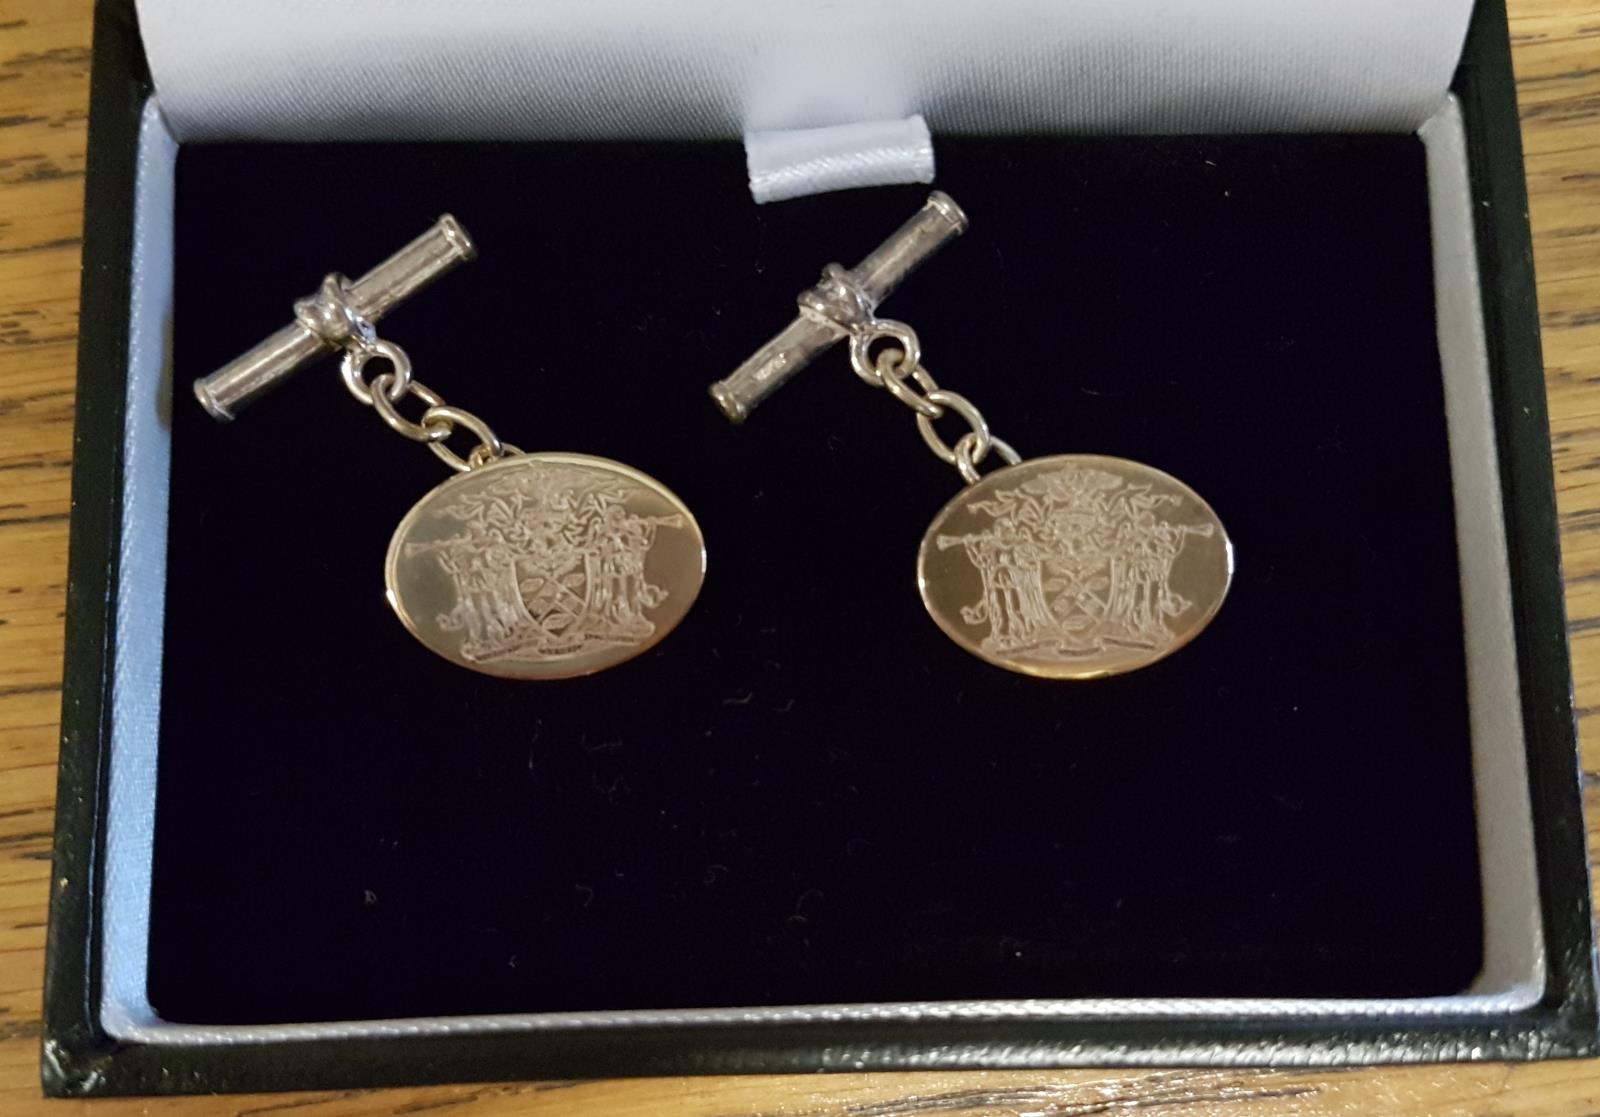 Silver Cufflinks Bar and Chain Fastening, oval in shape with Stationers’ Company Crest